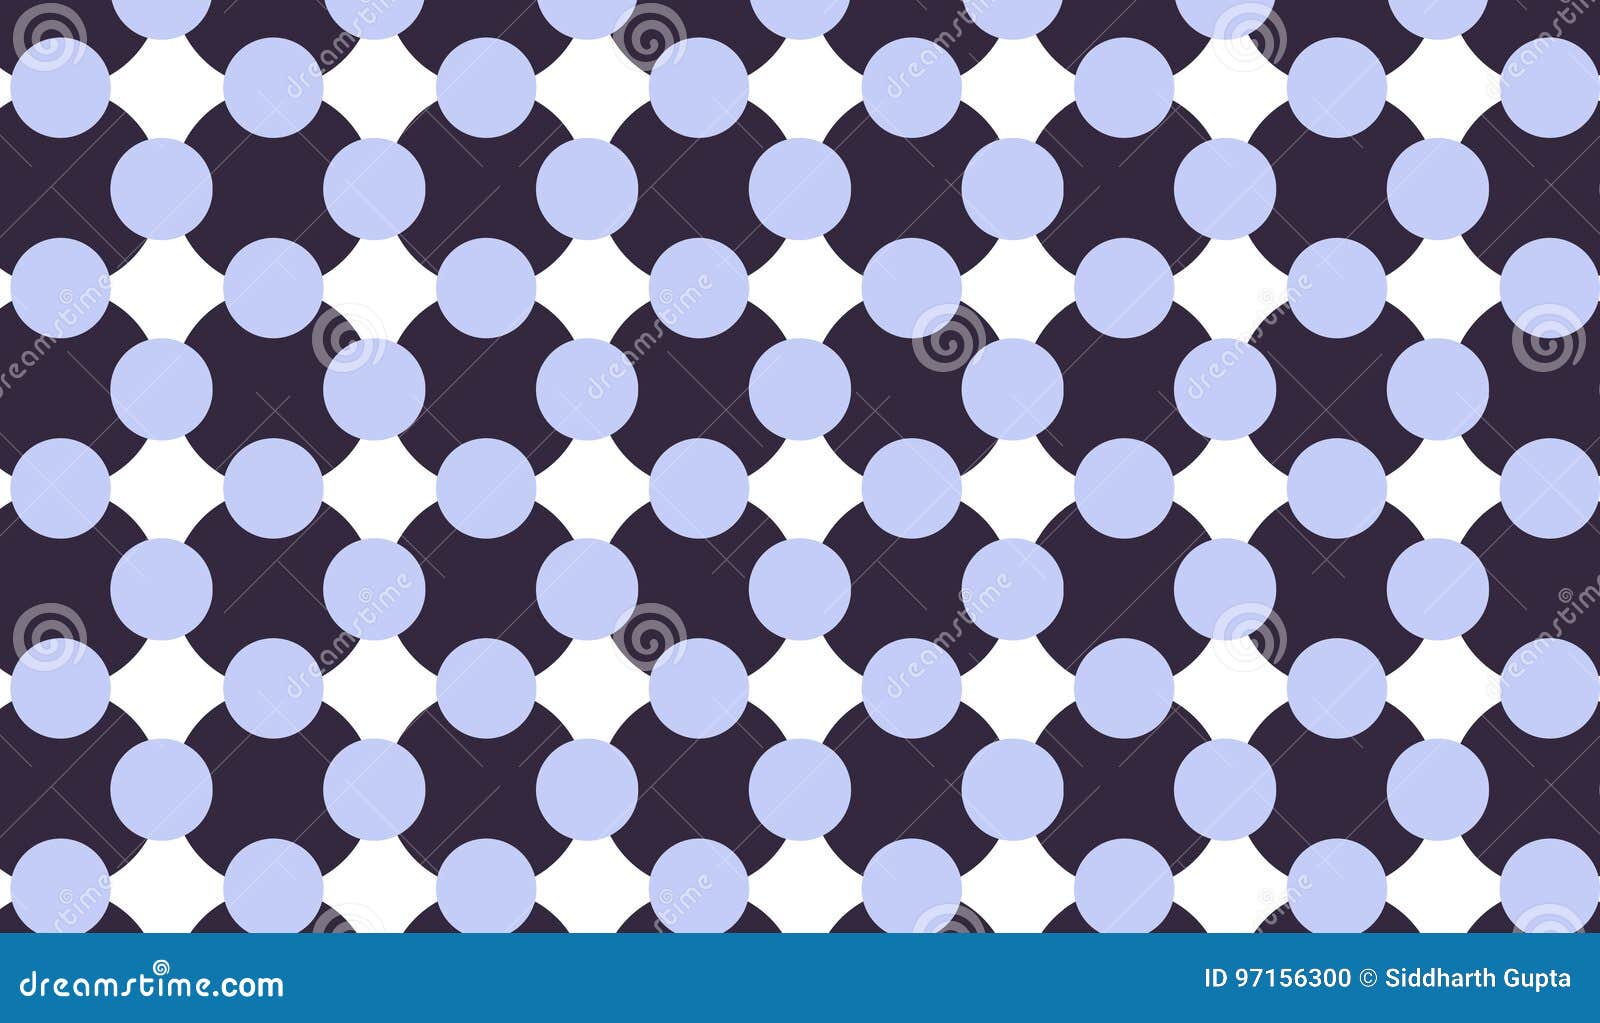 Simple Modern Abstract Blue Circle Checkered Pattern Stock Vector